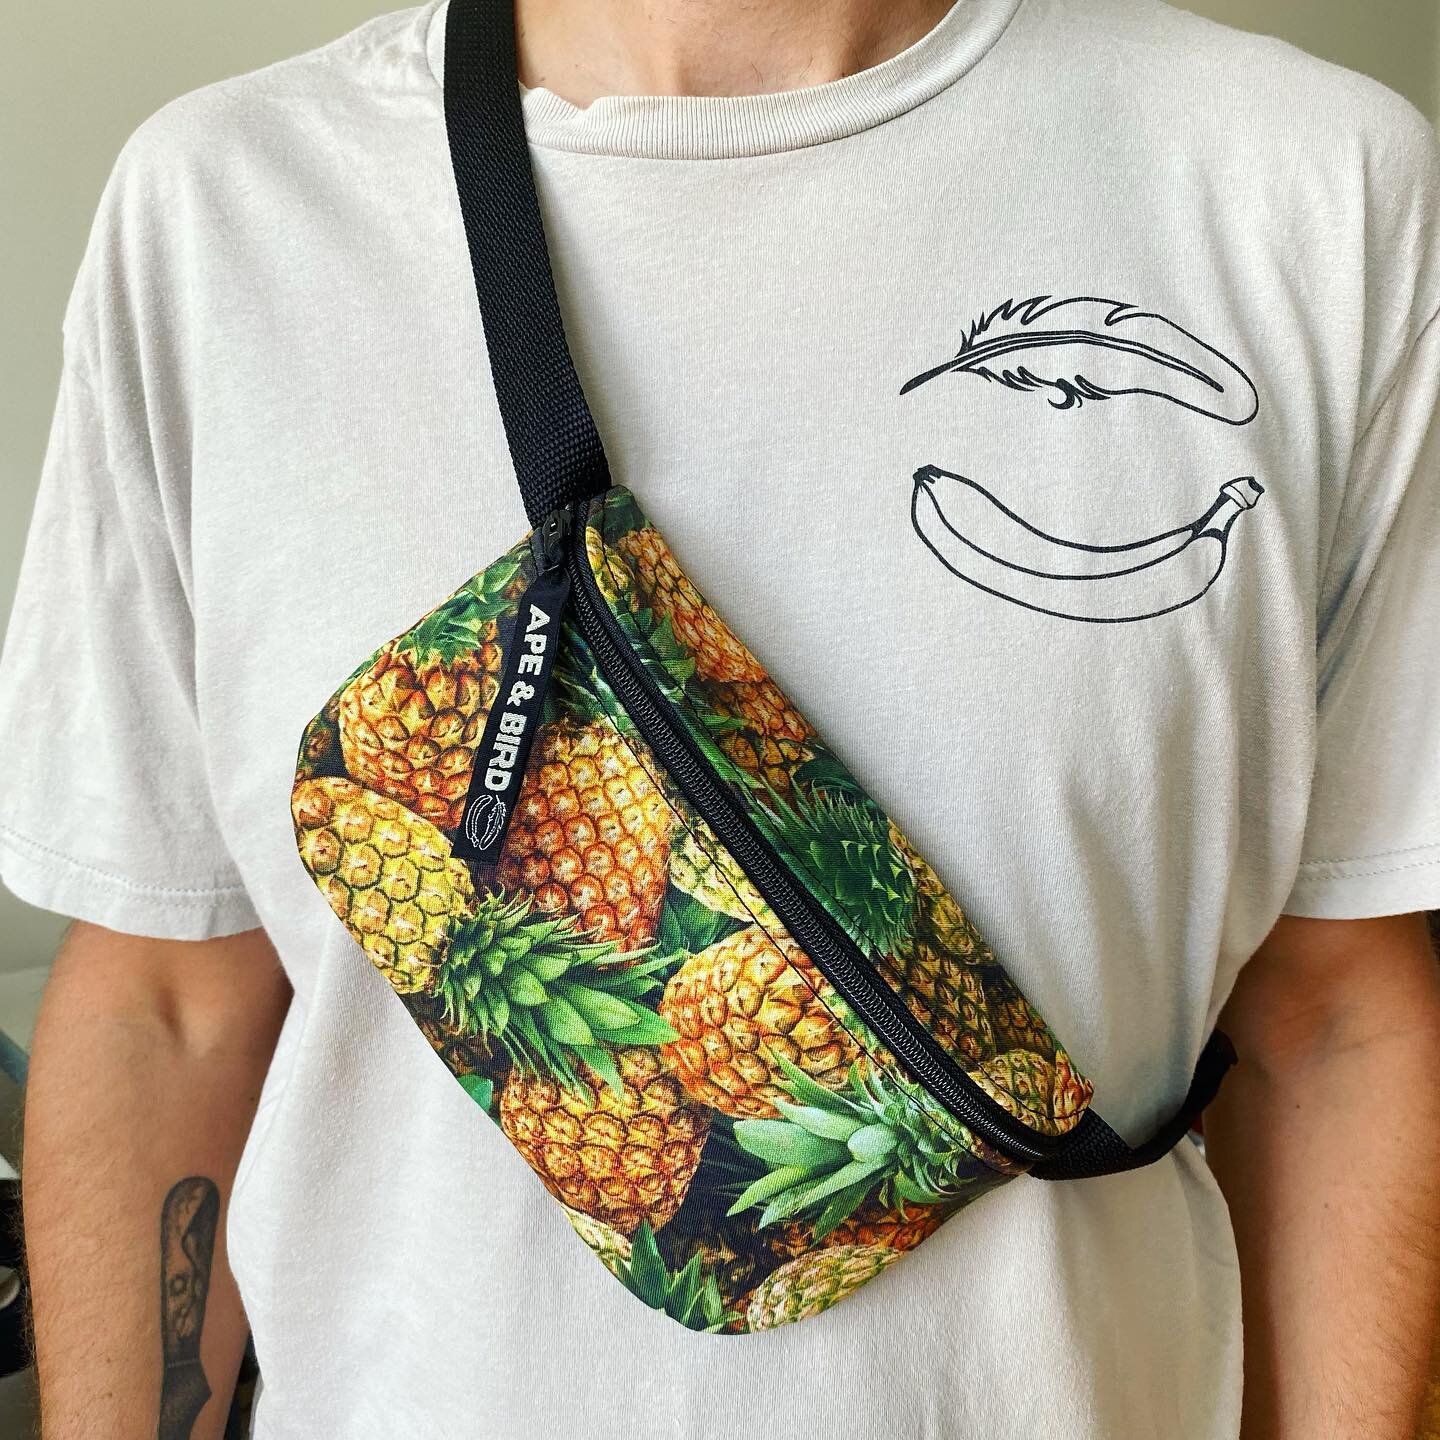 Thanks to everyone that grabbed a flash Friday cap yesterday. 

We also are going to keep adding to the fanny pack options on Fridays.

This week we have the pineapple fabric 😍  #fannypack #fannyfriday #apenbird